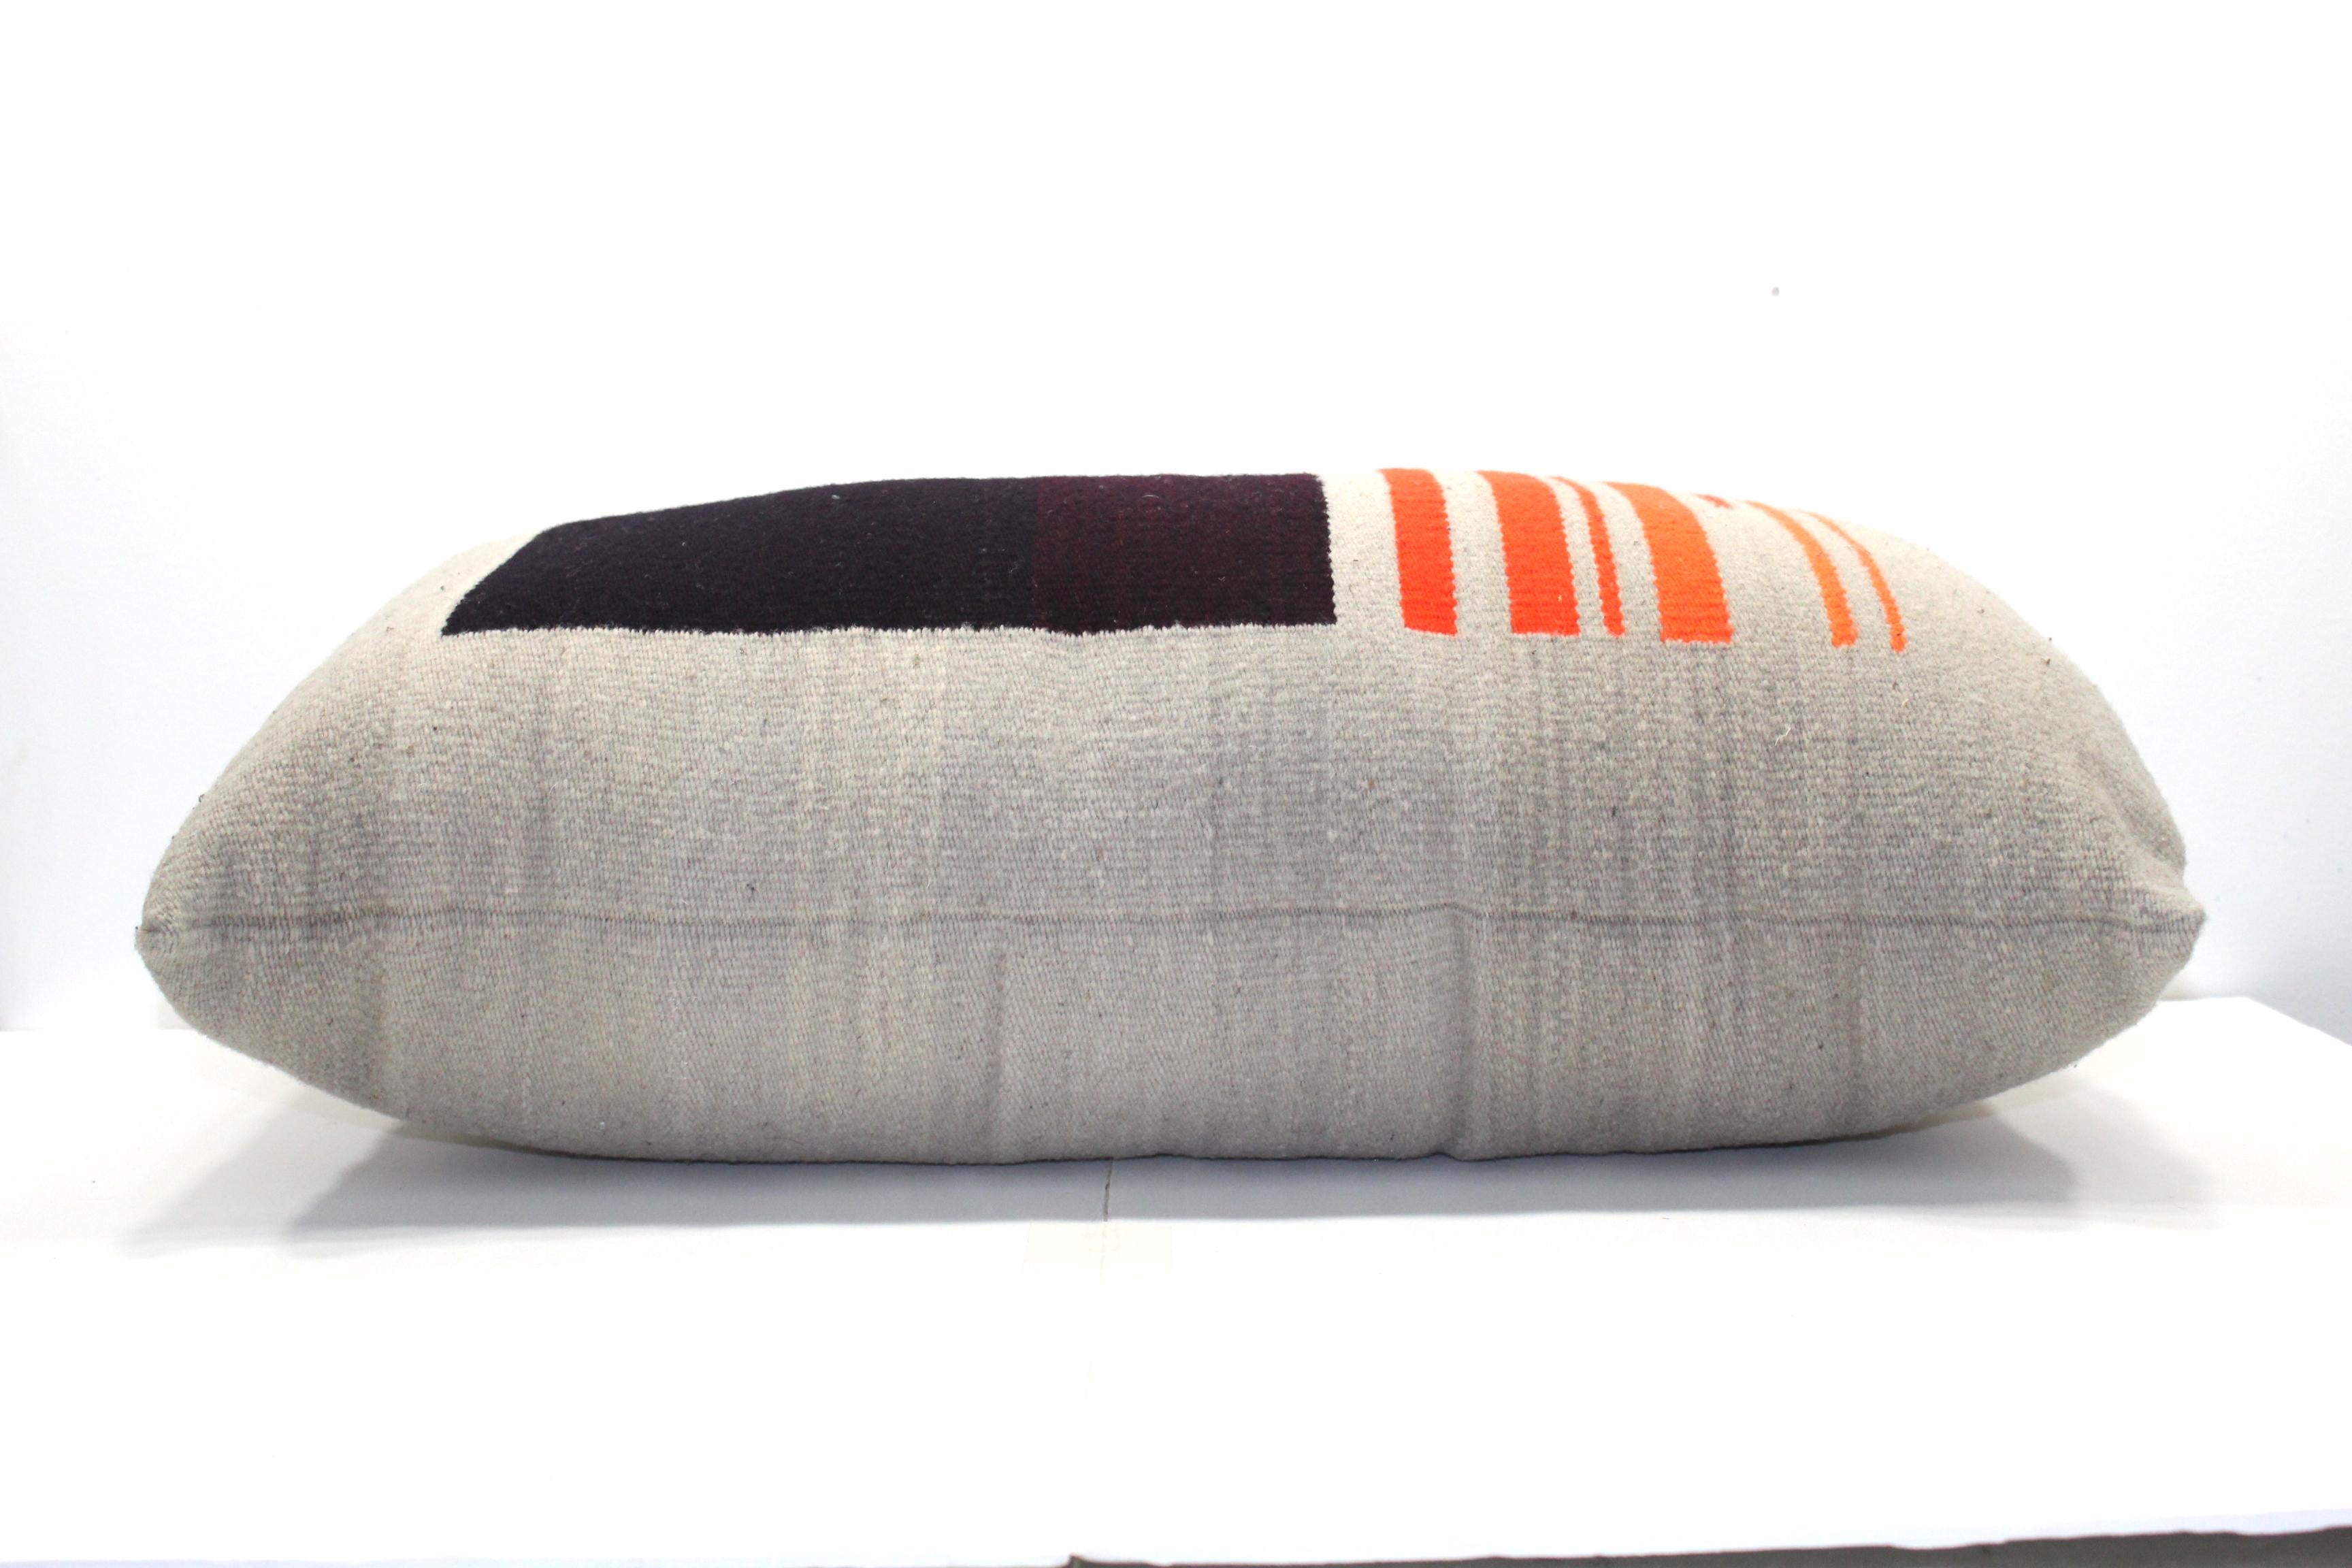 Contemporary Bespoke Handwoven Wool Throw Pillow, Natural Dye, Red, Orange and Grey